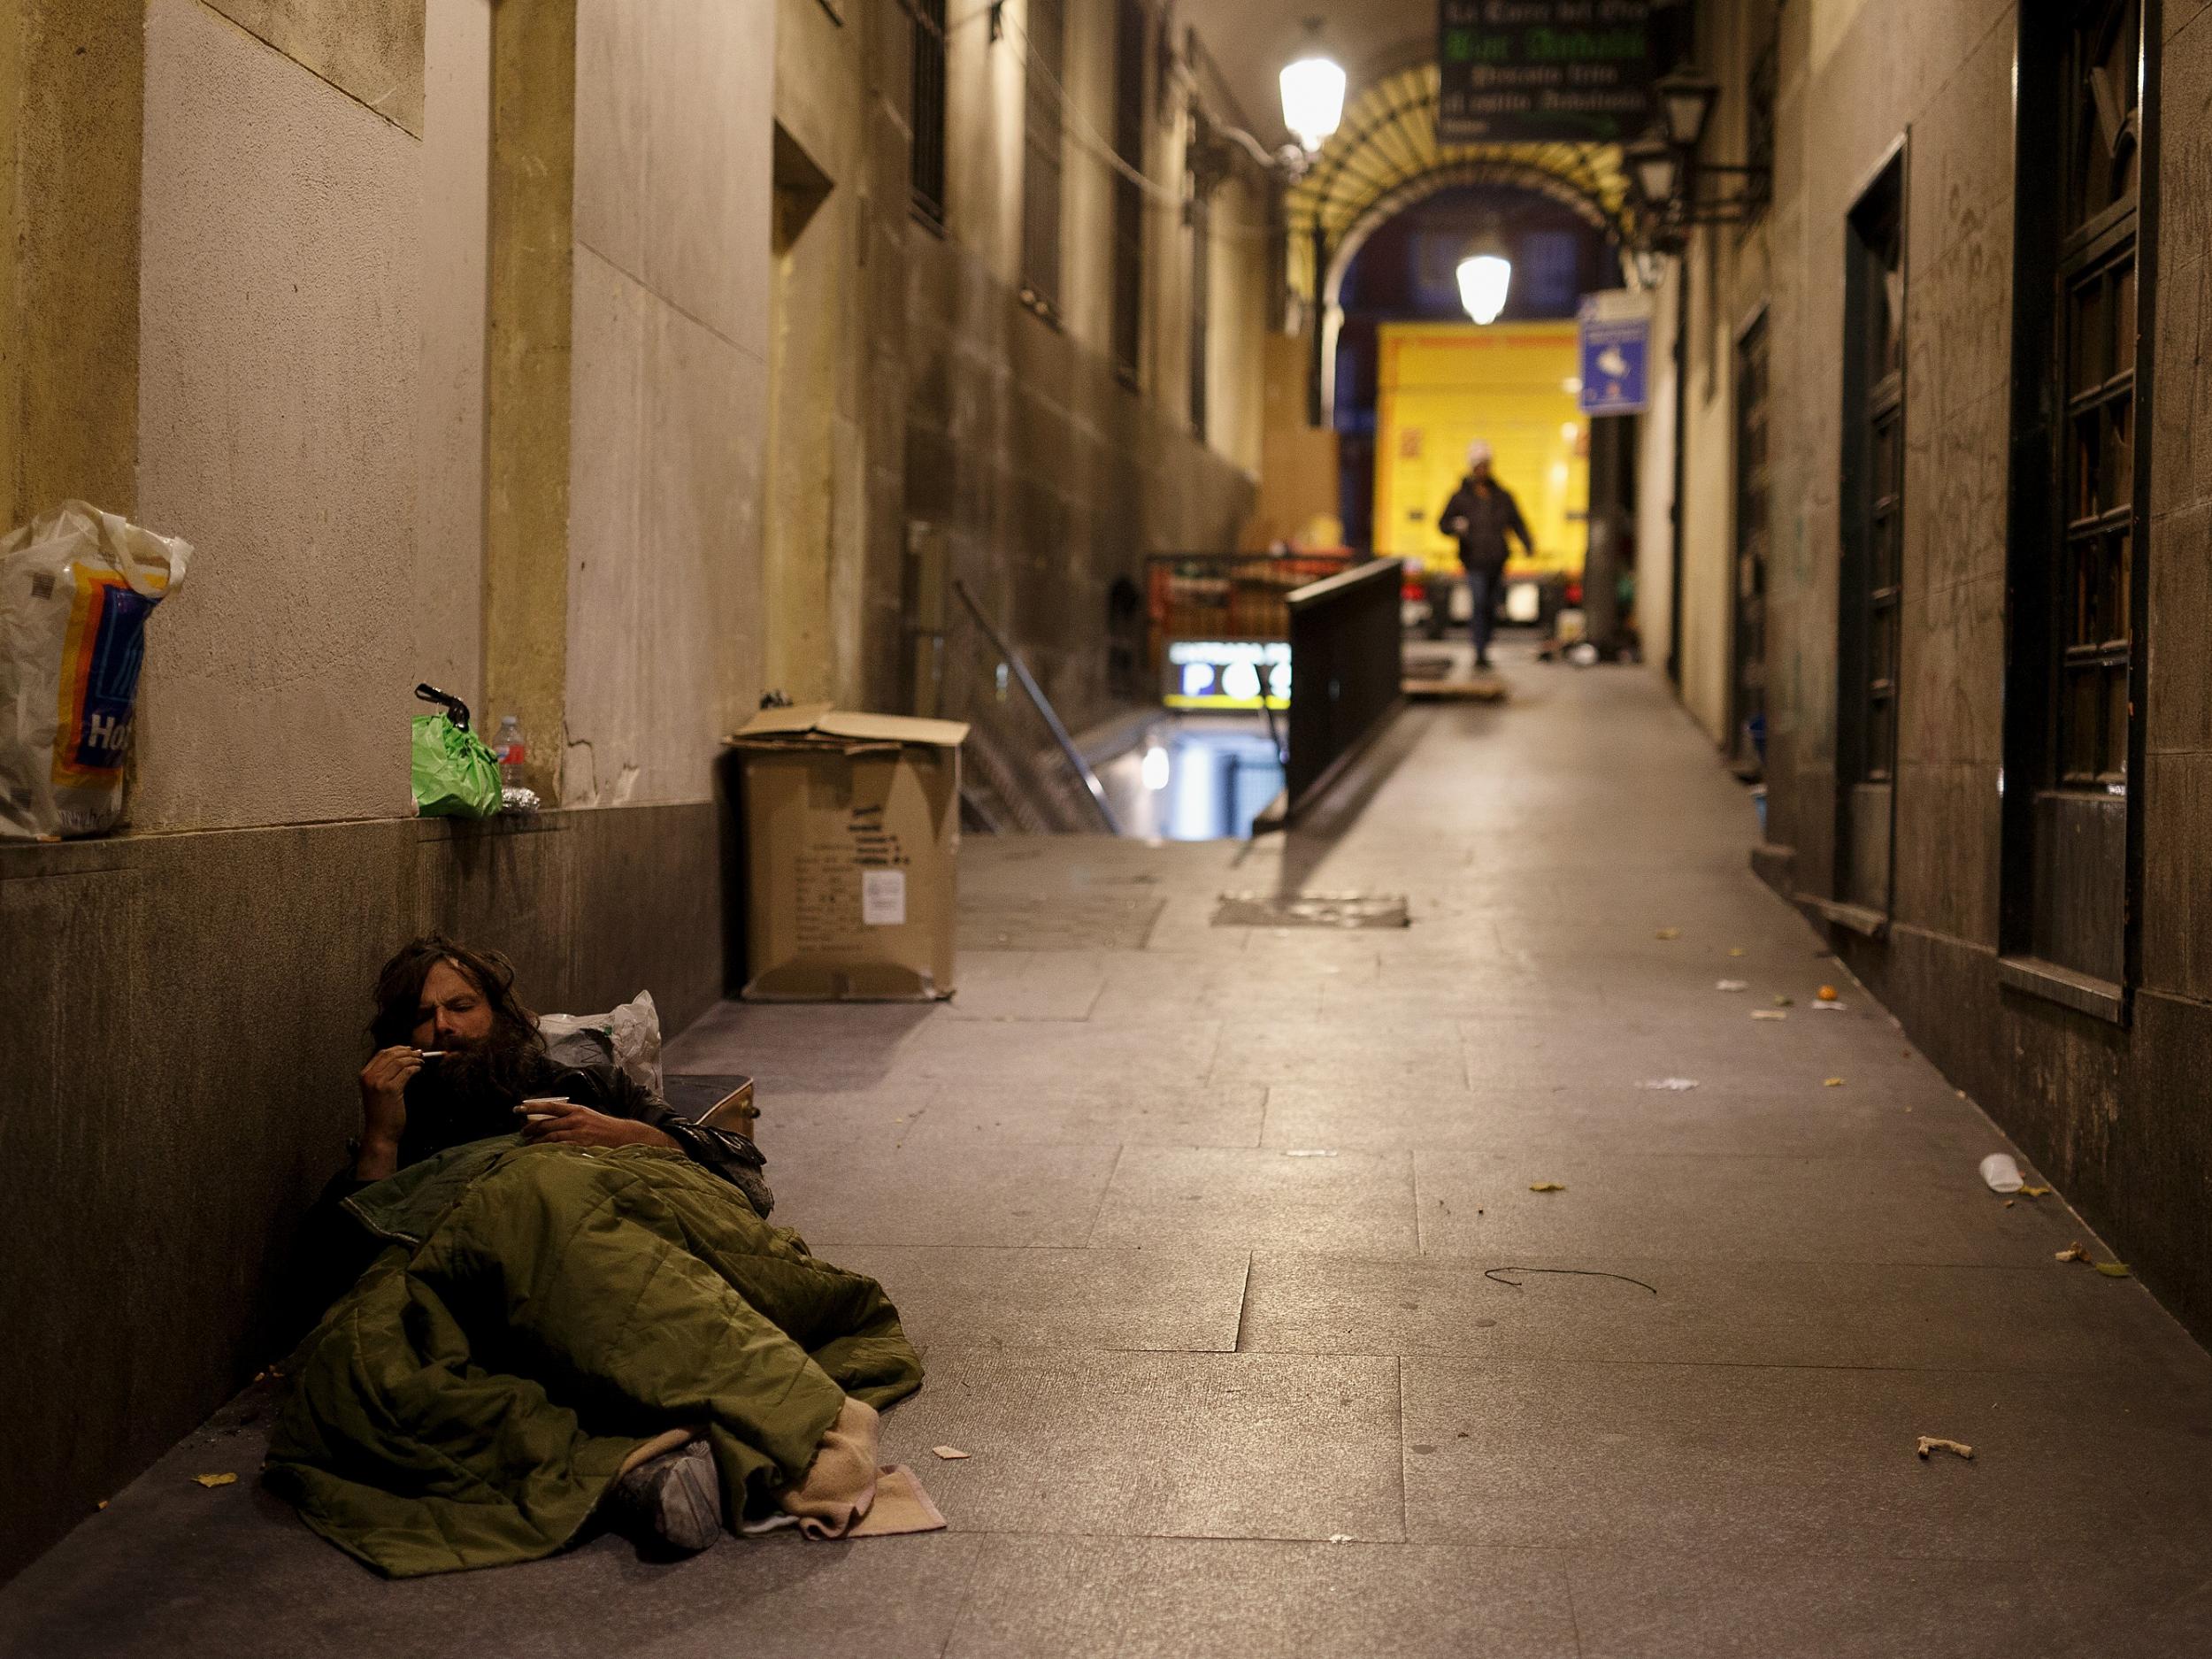 A homeless man rests in the street in Madrid